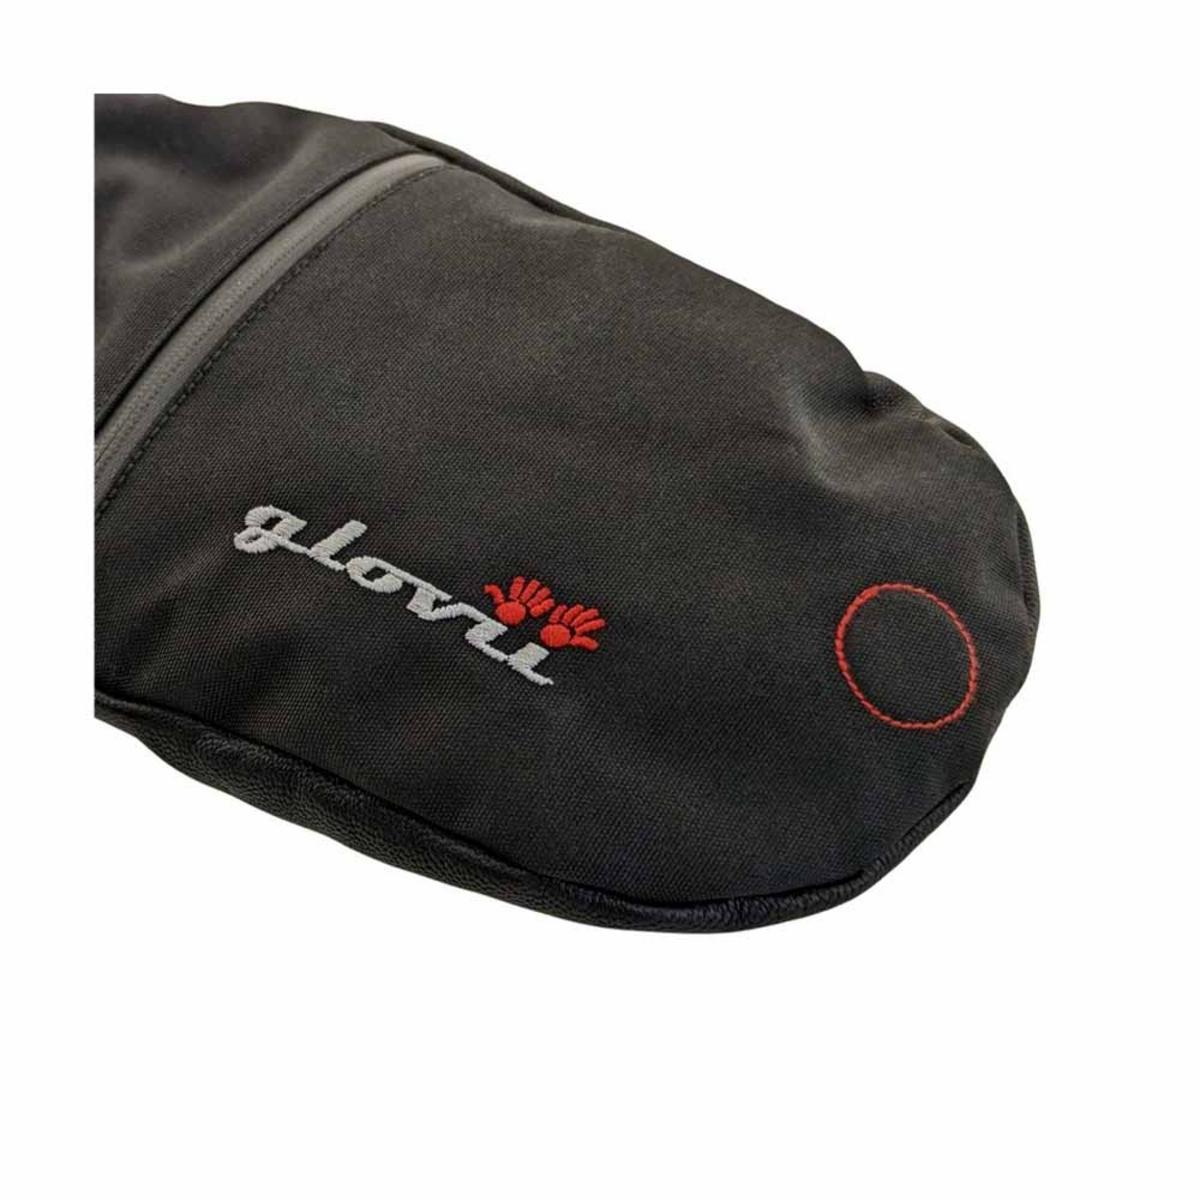 Glovii Universal 2-In-1 Heated Gloves with Insulated Cover